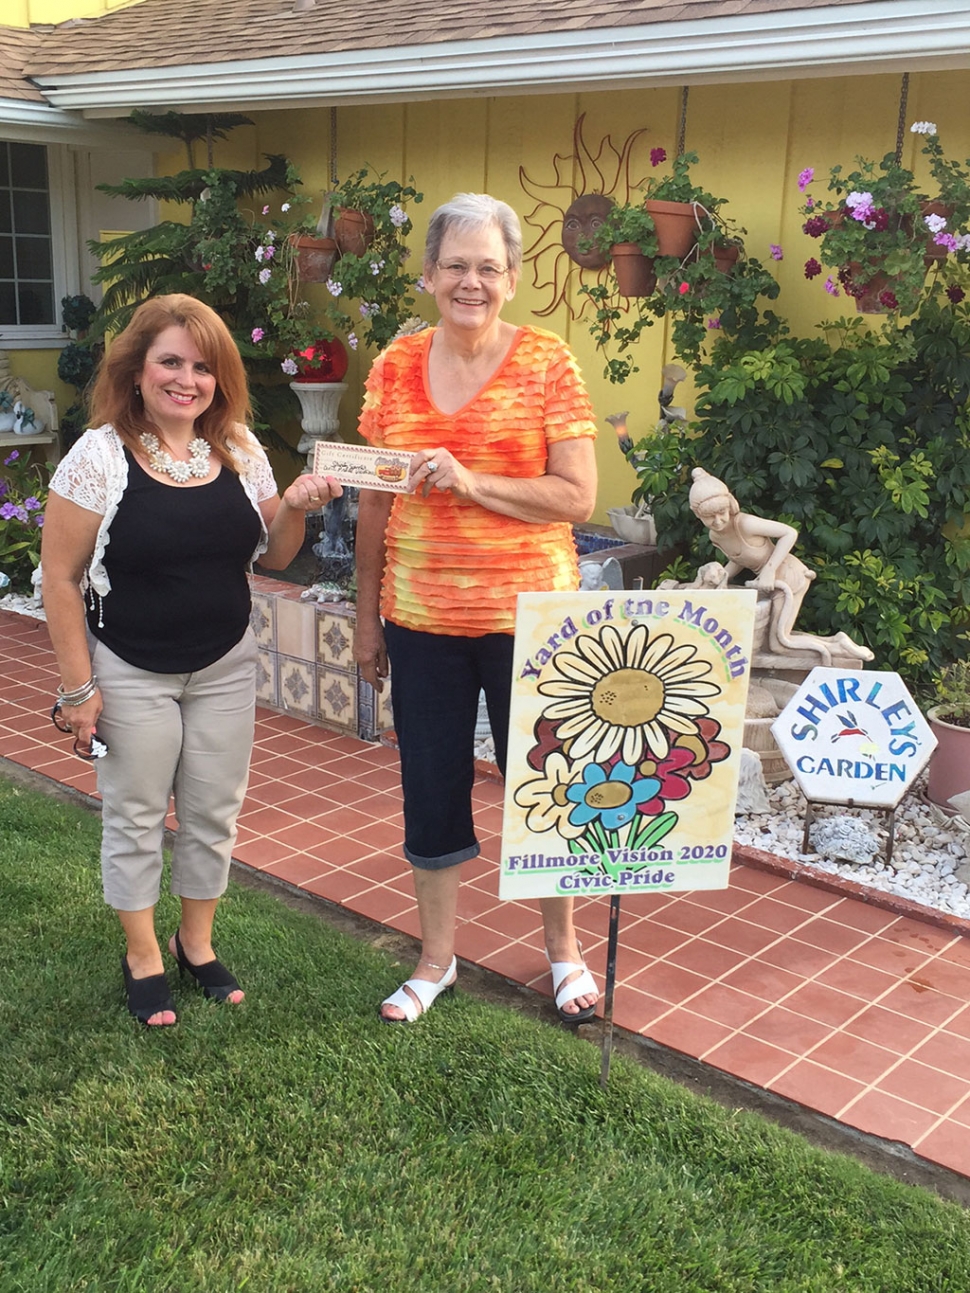 Theresa Robledo with Civic Pride Vision 2020 presents Yard of the Month to Shirley Spitler! Congratulations!  Please drive by 850 Oliver Street to view her gorgeous yard!  You will find at Shirley's home, roses, Christmas cactus, a lot of geraniums, succulents, and many beautiful garden statues. When I asked Shirley what inspires her to garden, she said, about 10 years ago her late husband, Bud Spitler, said do you want to trade grocery shopping for gardening?  Obviously, Shirley accepted and has been gardening ever since! Thank you to Otto & Sons Nursery for their generous gift certificate, where she will enjoy finding more items for her yard!